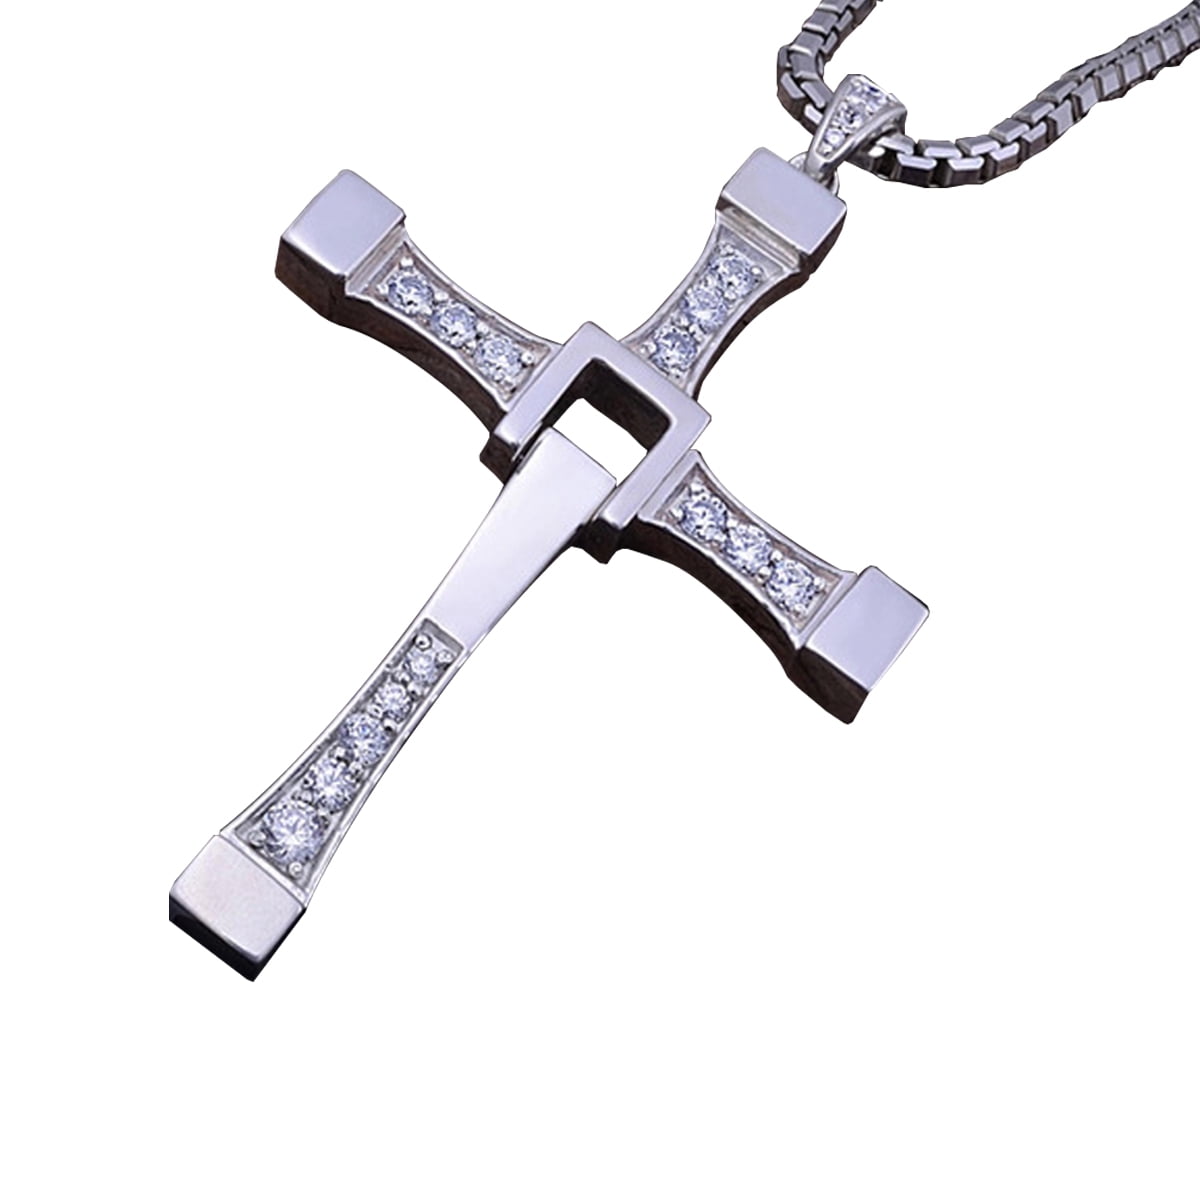 Fast and Furious- Cross Crystal Pendant Necklace